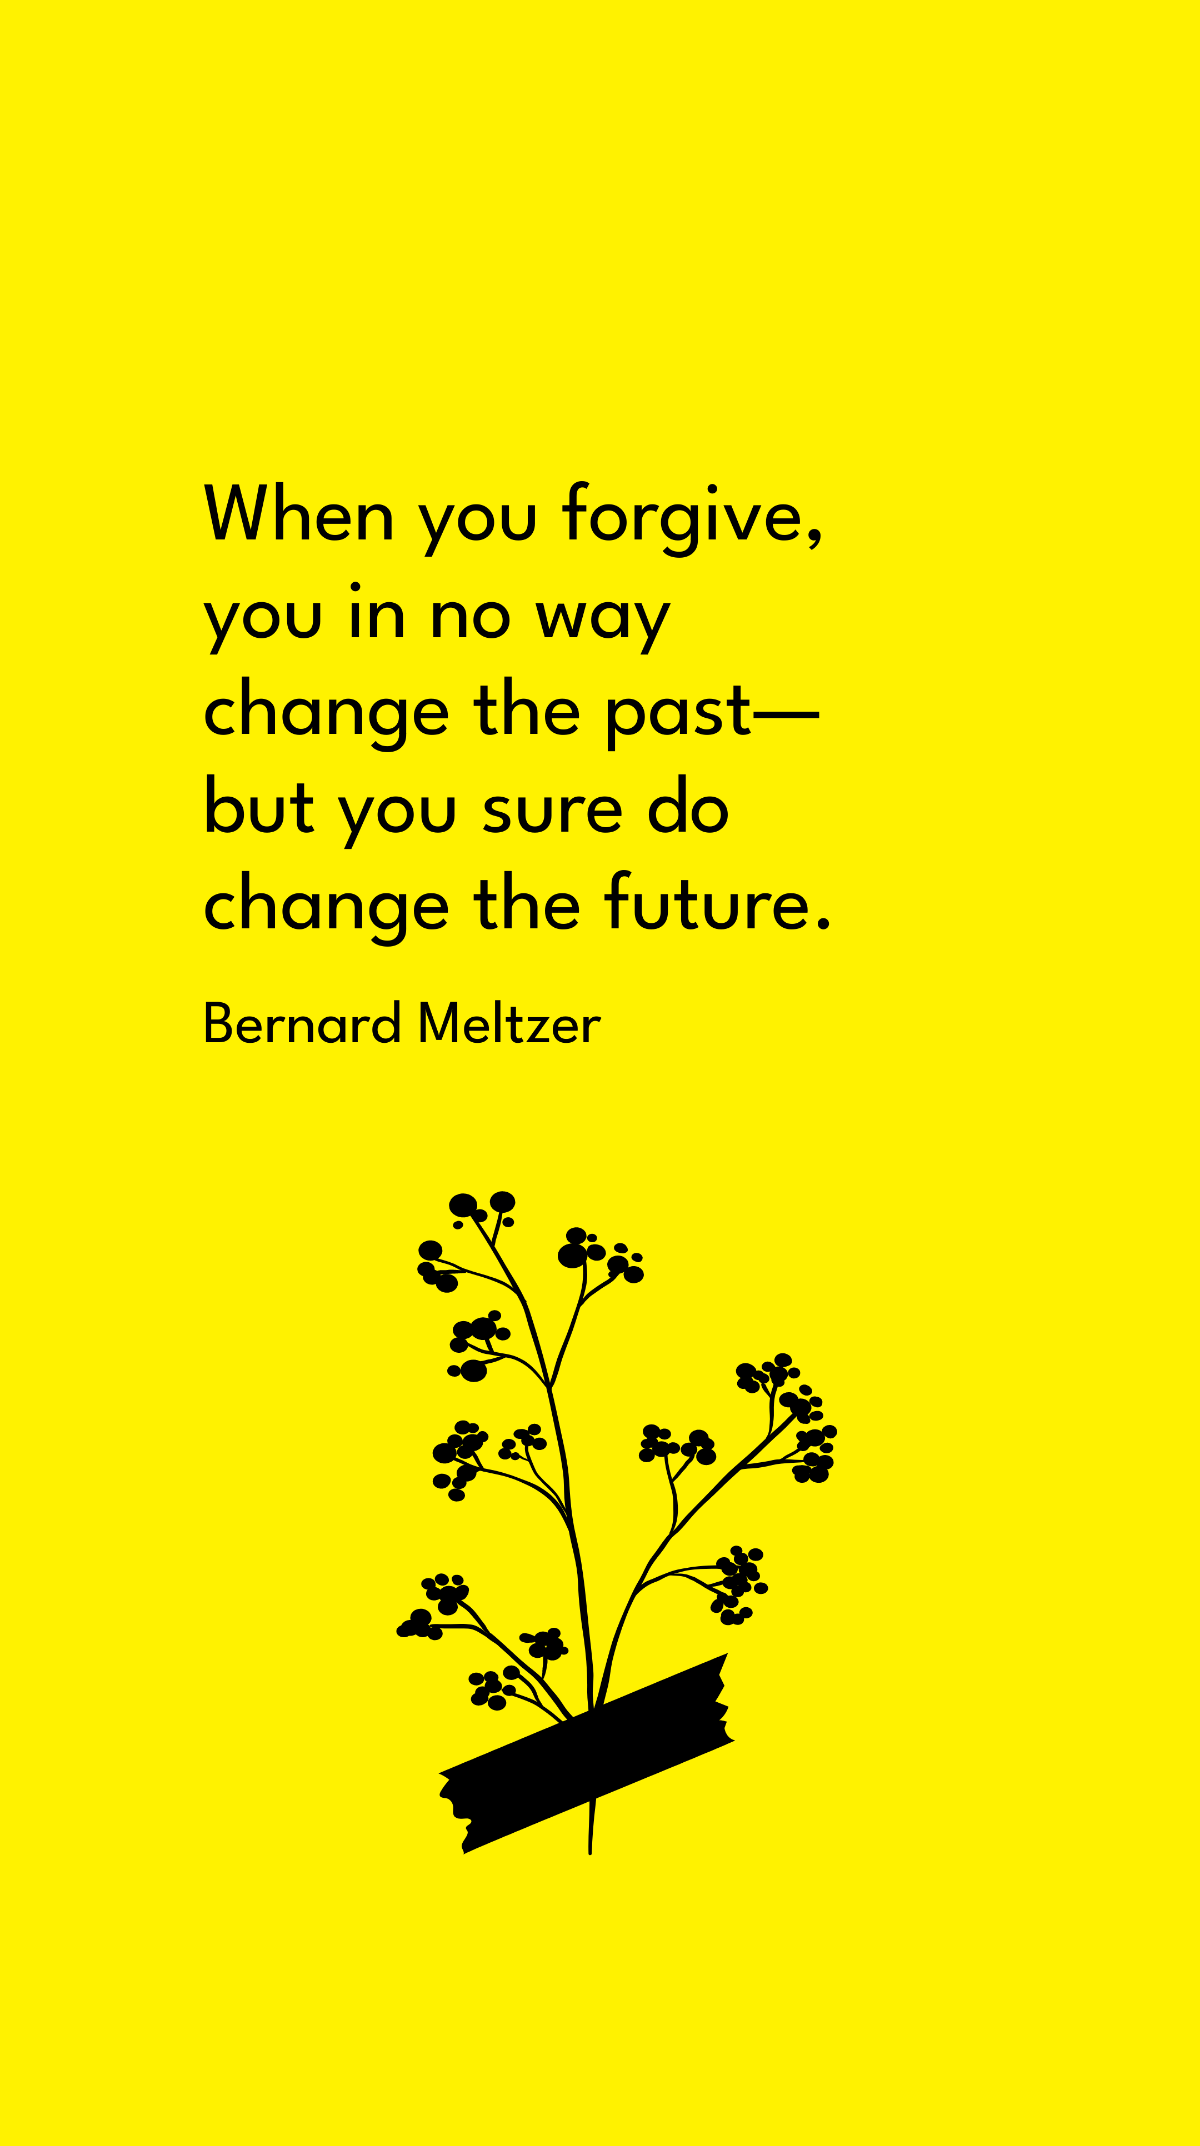 Bernard Meltzer - When you forgive, you in no way change the past - but you sure do change the future.